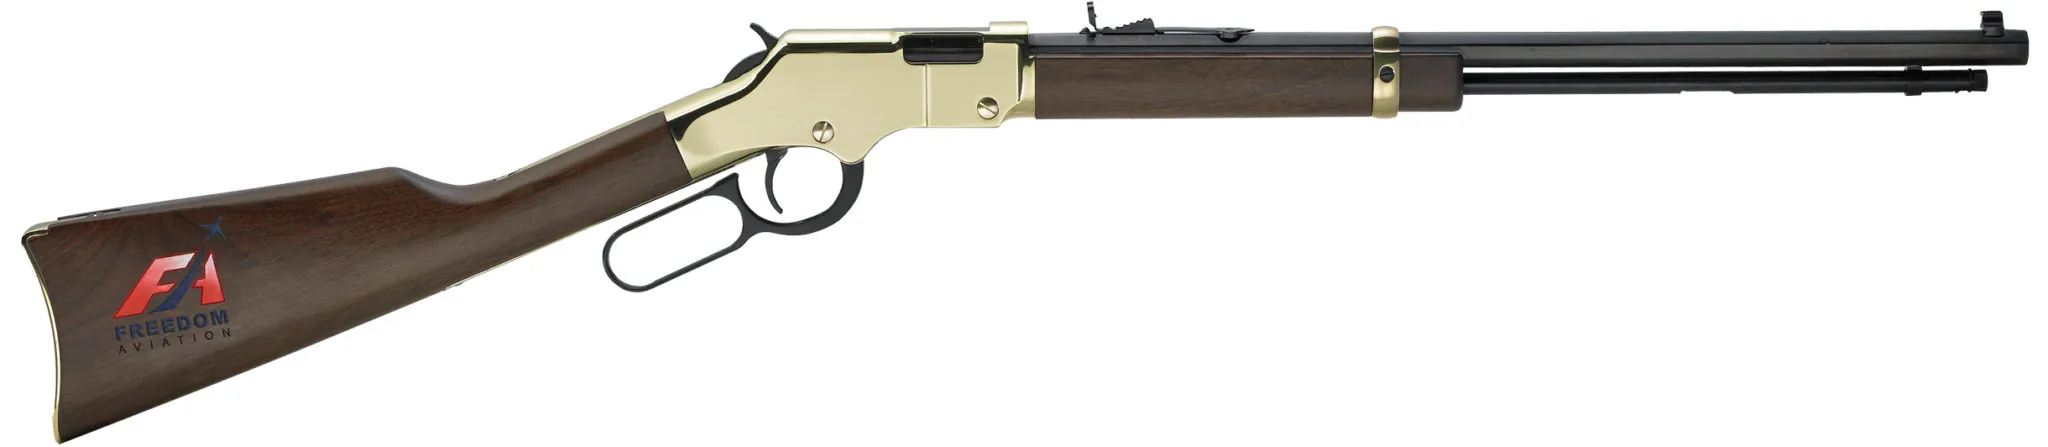 Henry Corp Eds Rifles- H004-freedom aviation